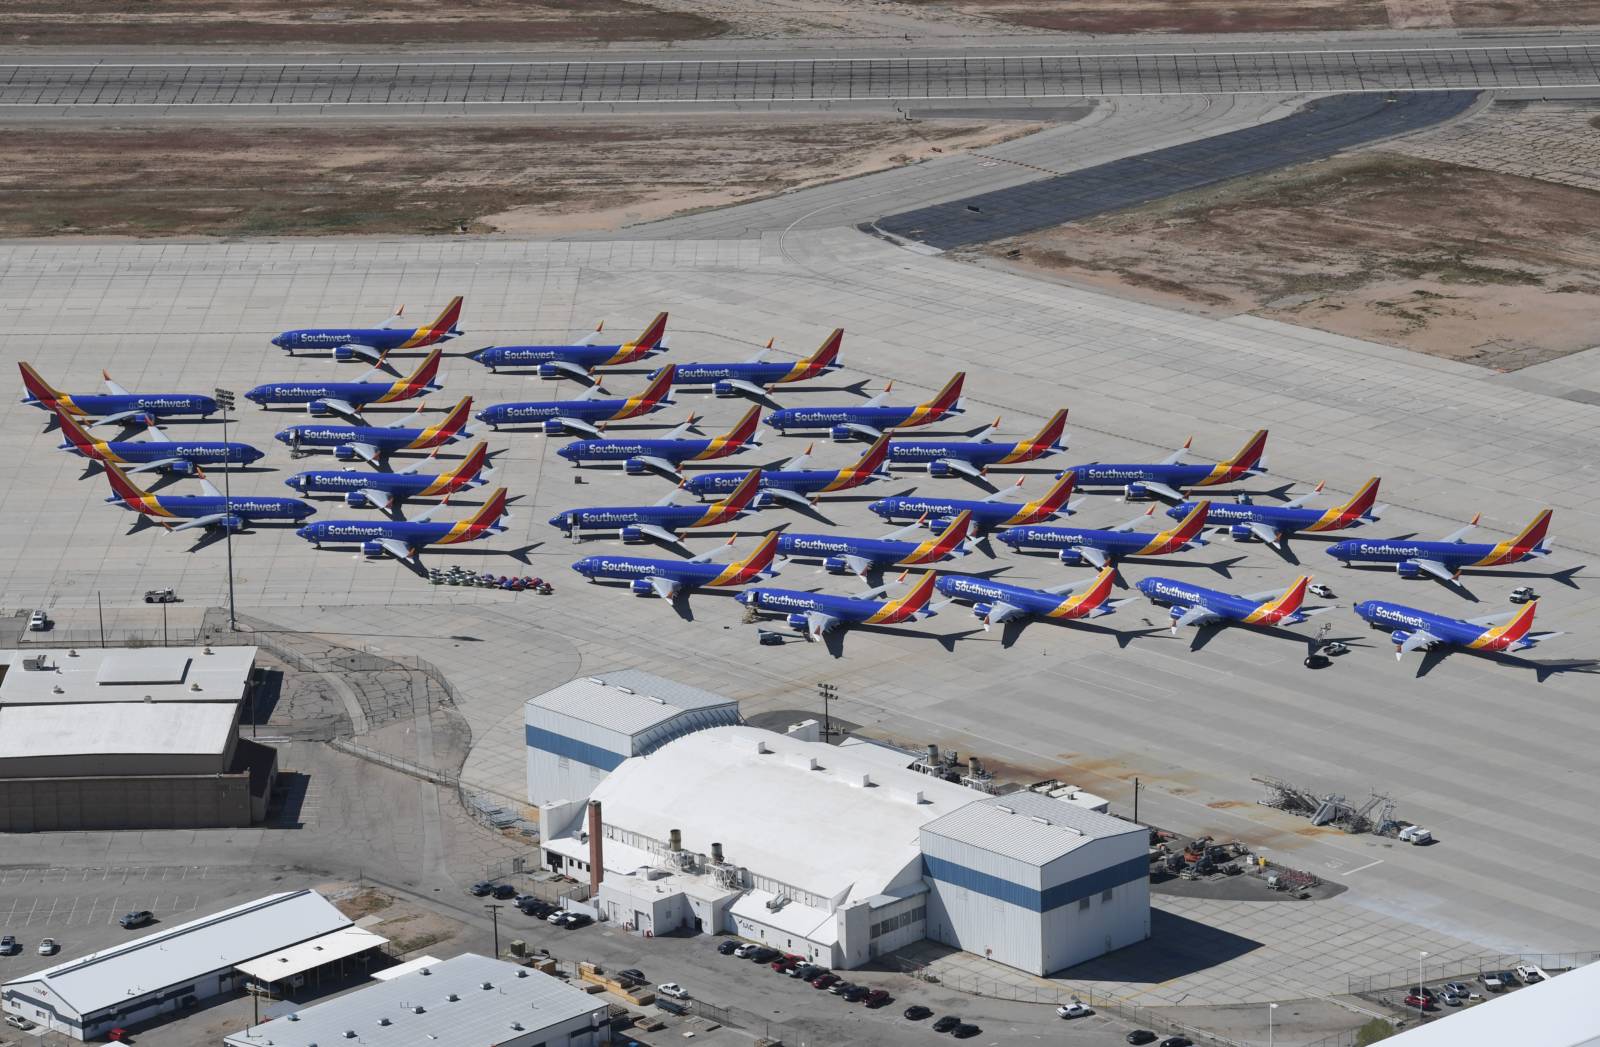 Southwest Airlines Boeing 737 MAX aircraft are parked on the tarmac after being grounded, at the Southern California Logistics Airport in Victorville, California on March 28, 2019. - After two fatal crashes in five months, Boeing is trying hard -- very hard -- to present itself as unfazed by the crisis that surrounds the company. The company's sprawling factory in Renton, Washington is a hive of activity on this sunny Wednesday, March 28, 2019, during a tightly-managed media tour as Boeing tries to communicate confidence that it has nothing to hide. Boeing gathered hundreds of pilots and reporters to unveil the changes to the MCAS stall prevention system, which has been implicated in the crashes in Ethiopia and Indonesia, as part of a charm offensive to restore the company's reputation. (Photo by Mark RALSTON / AFP) (Photo credit should read MARK RALSTON/AFP/Getty Images)